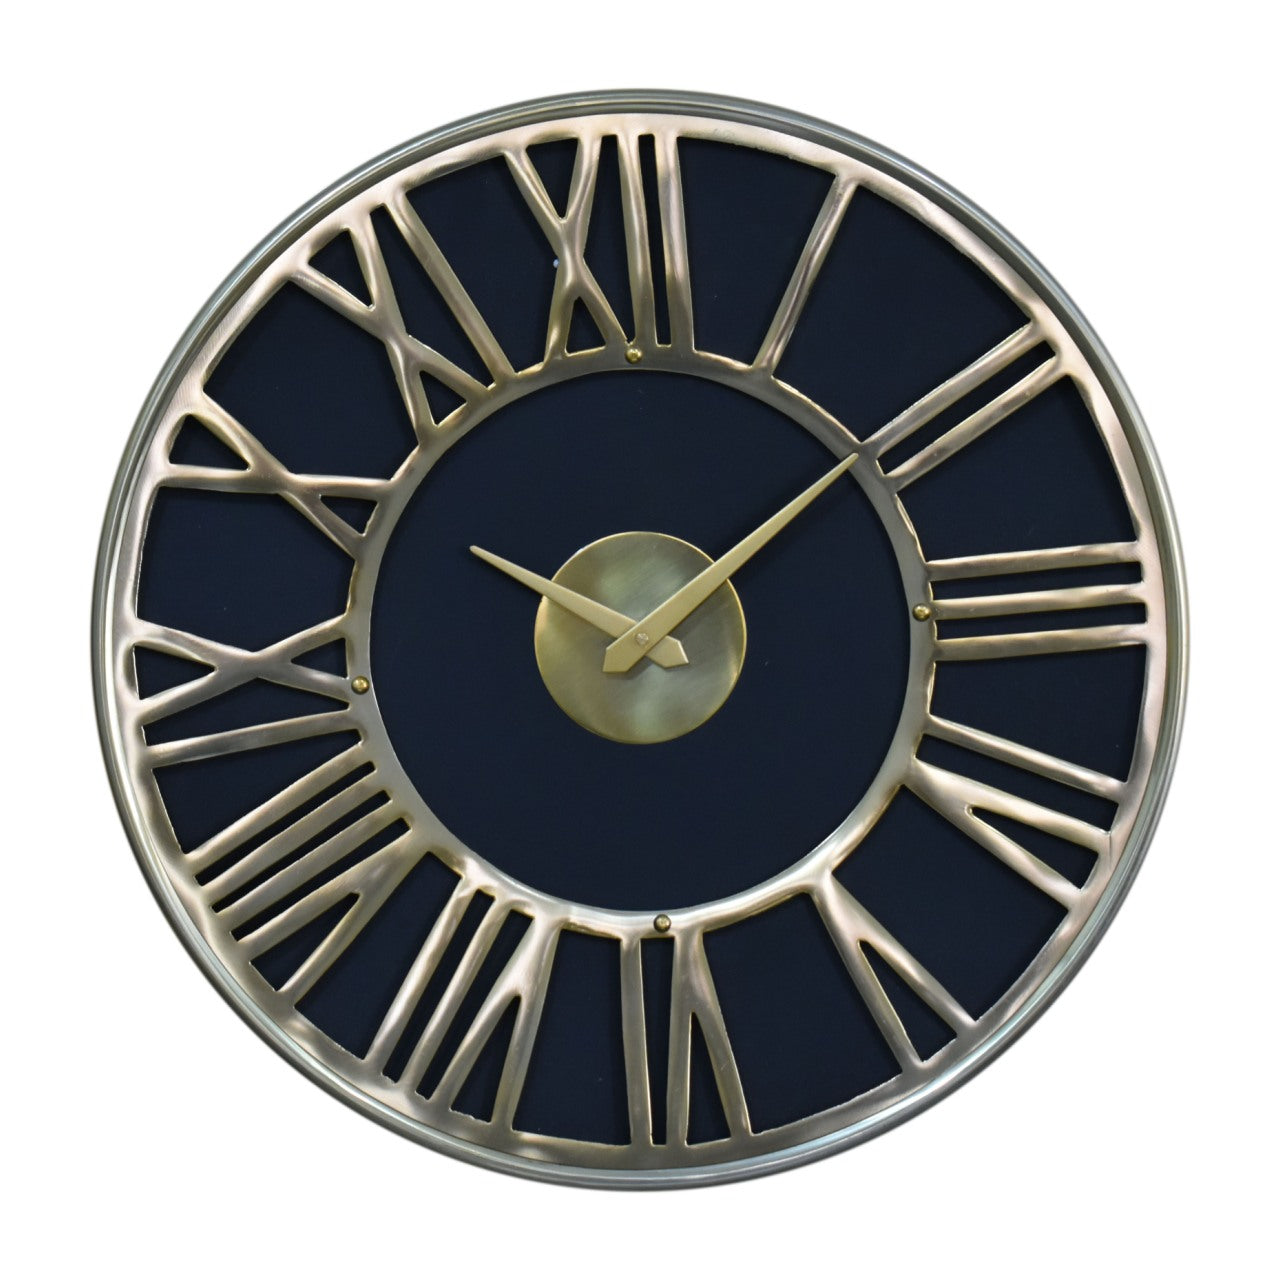 View Black and Gold Wall Clock information